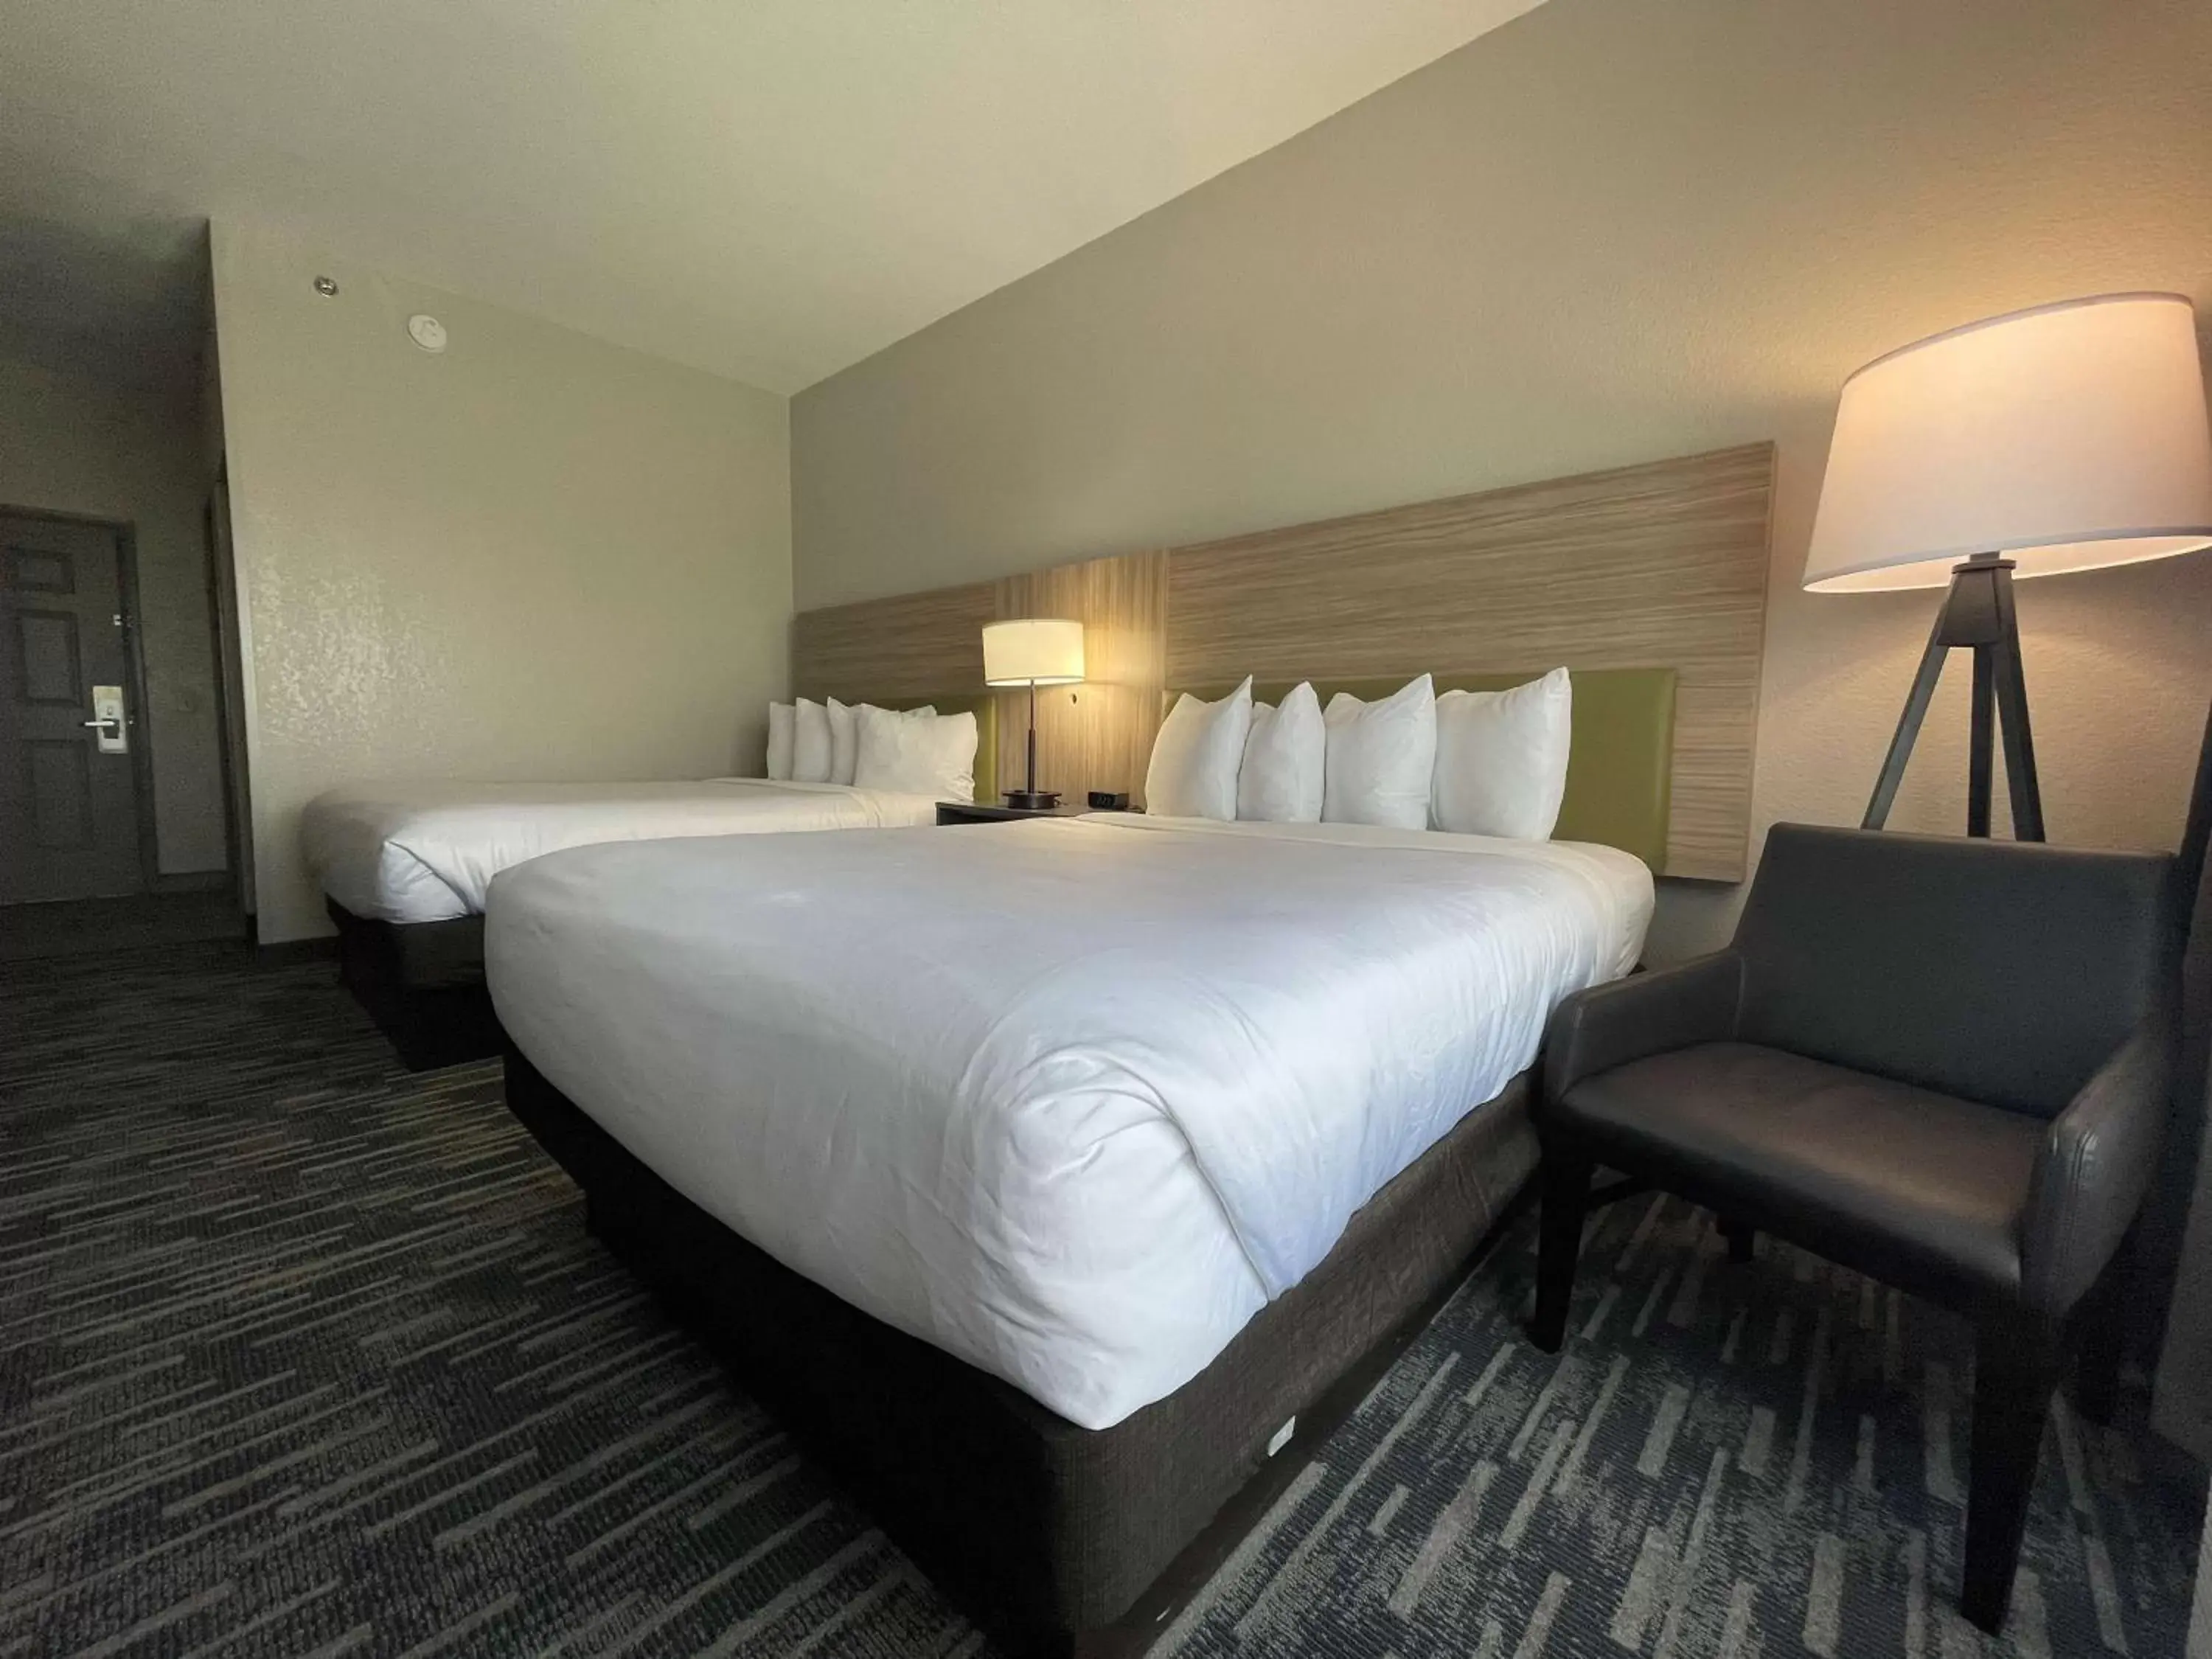 Bed in Country Inn & Suites by Radisson, Valdosta, GA - NEWLY RENOVATED